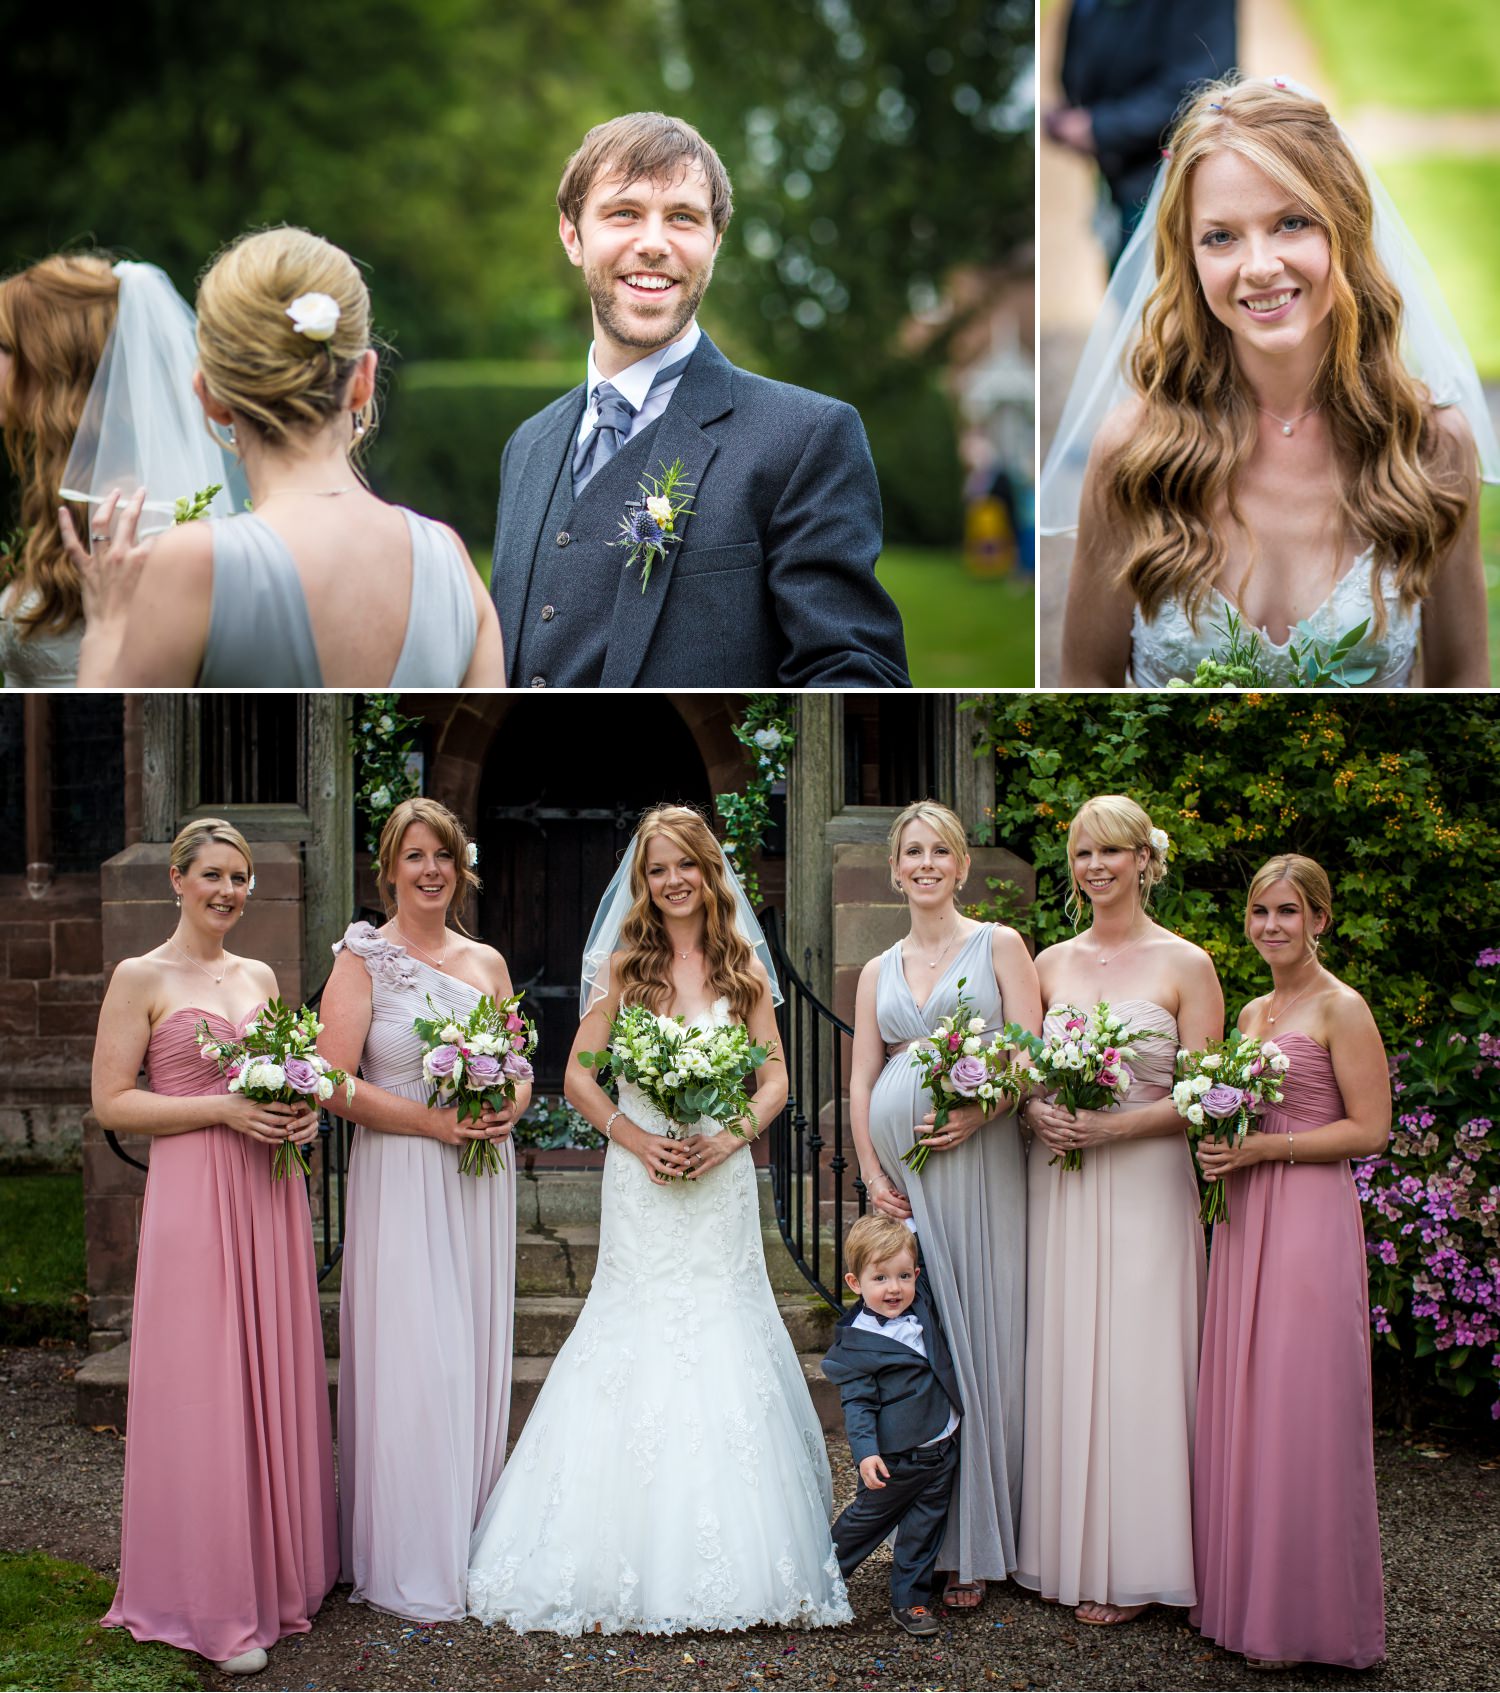 Wedding bridal party at Cheshire venue Hundred House Hotel